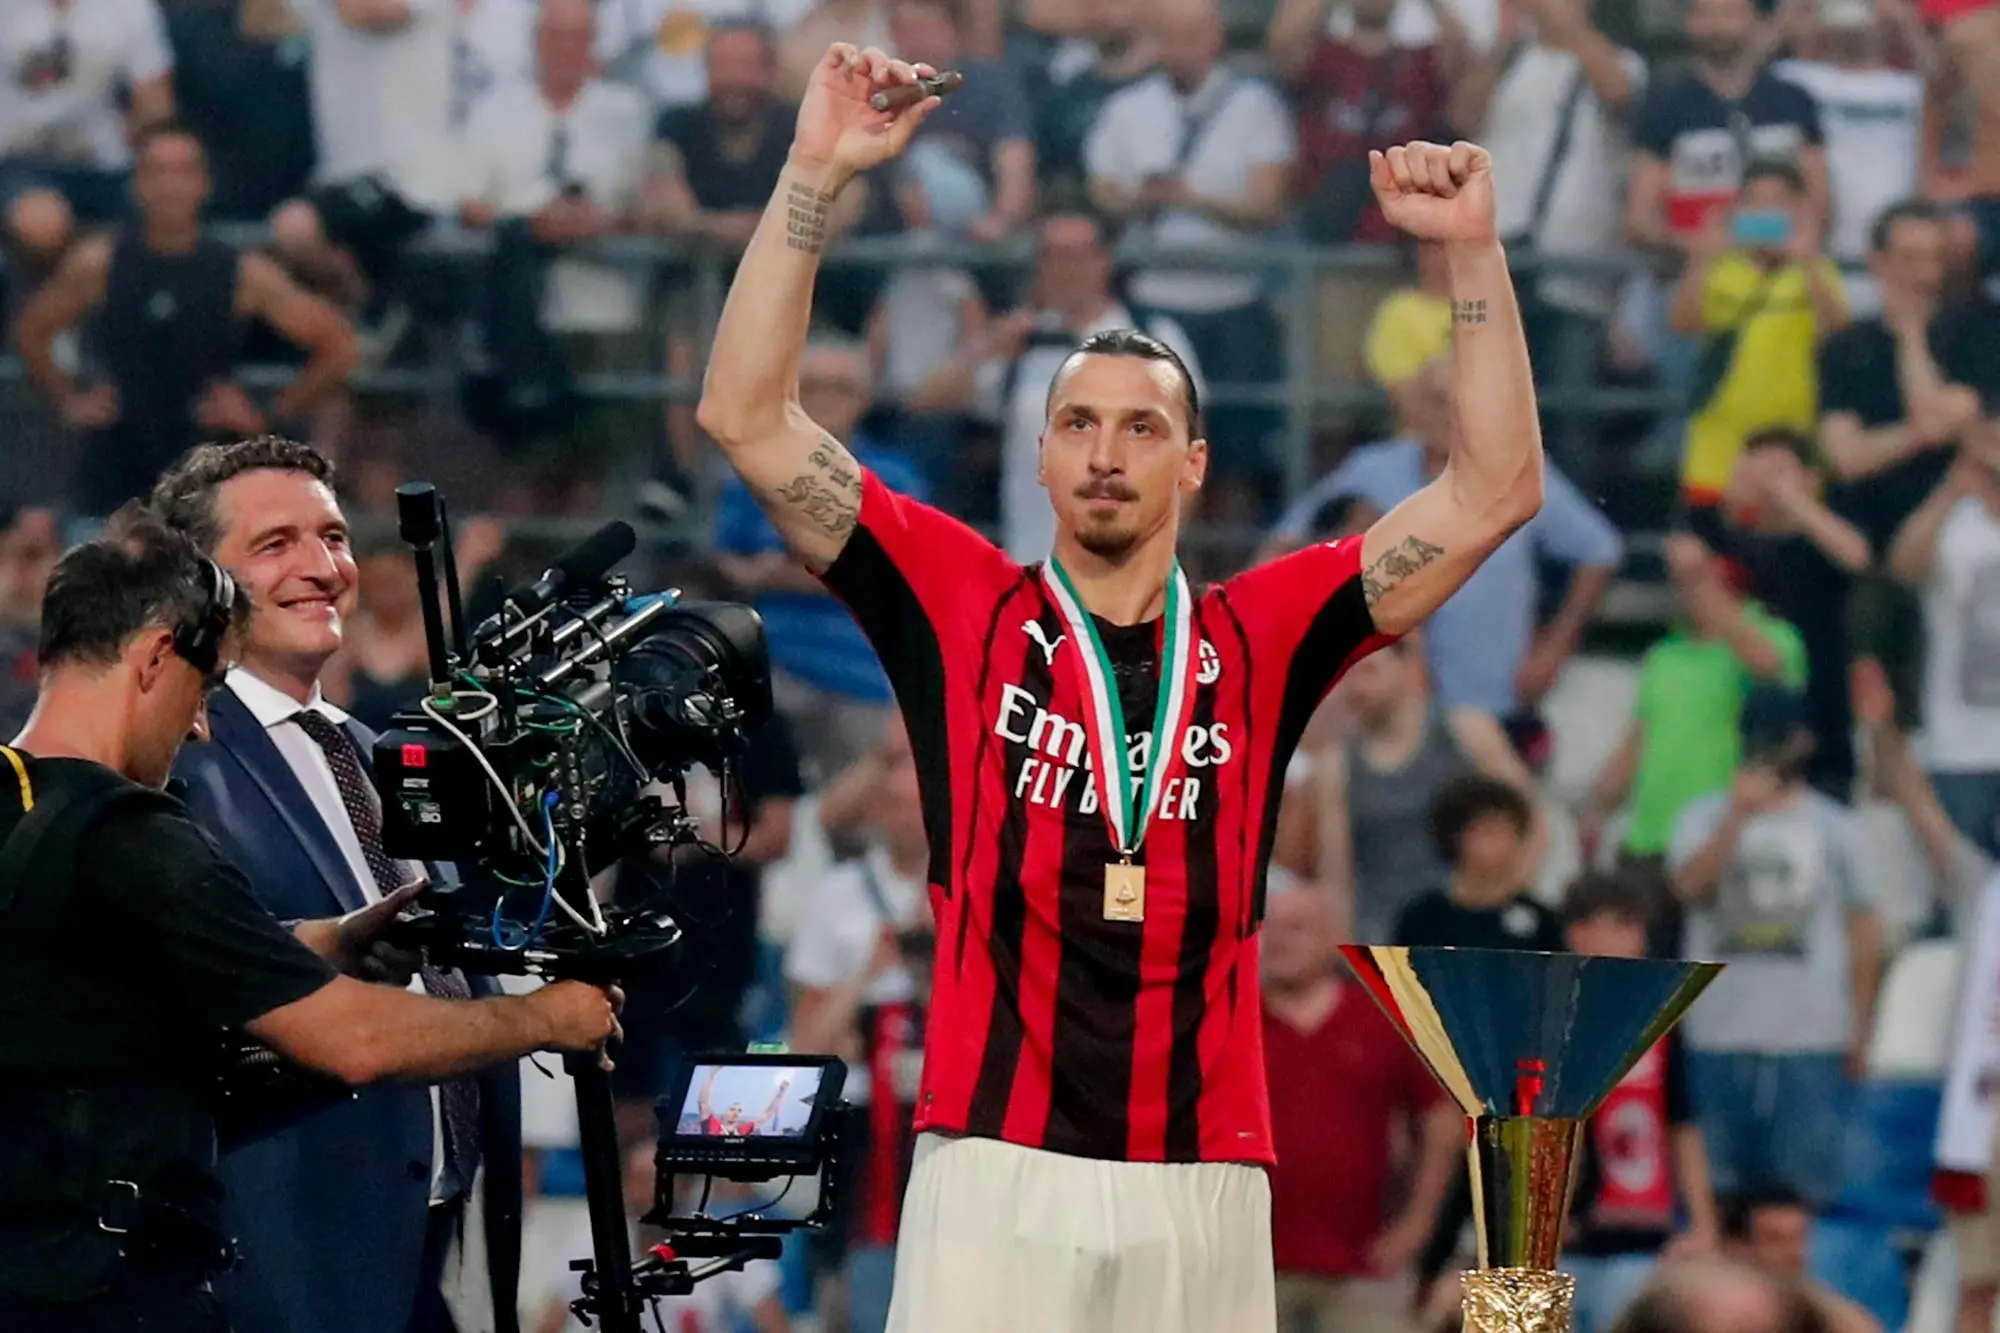 Milan's Zlatan Ibrahimovic celebrates after winning the Scudetto trophy at the end of the Italian Serie A soccer match US Sassuolo vs AC Milan at Mapei Stadium in Reggio Emilia, Italy, 22 May 2022. ANSA / SERENA CAMPANINI